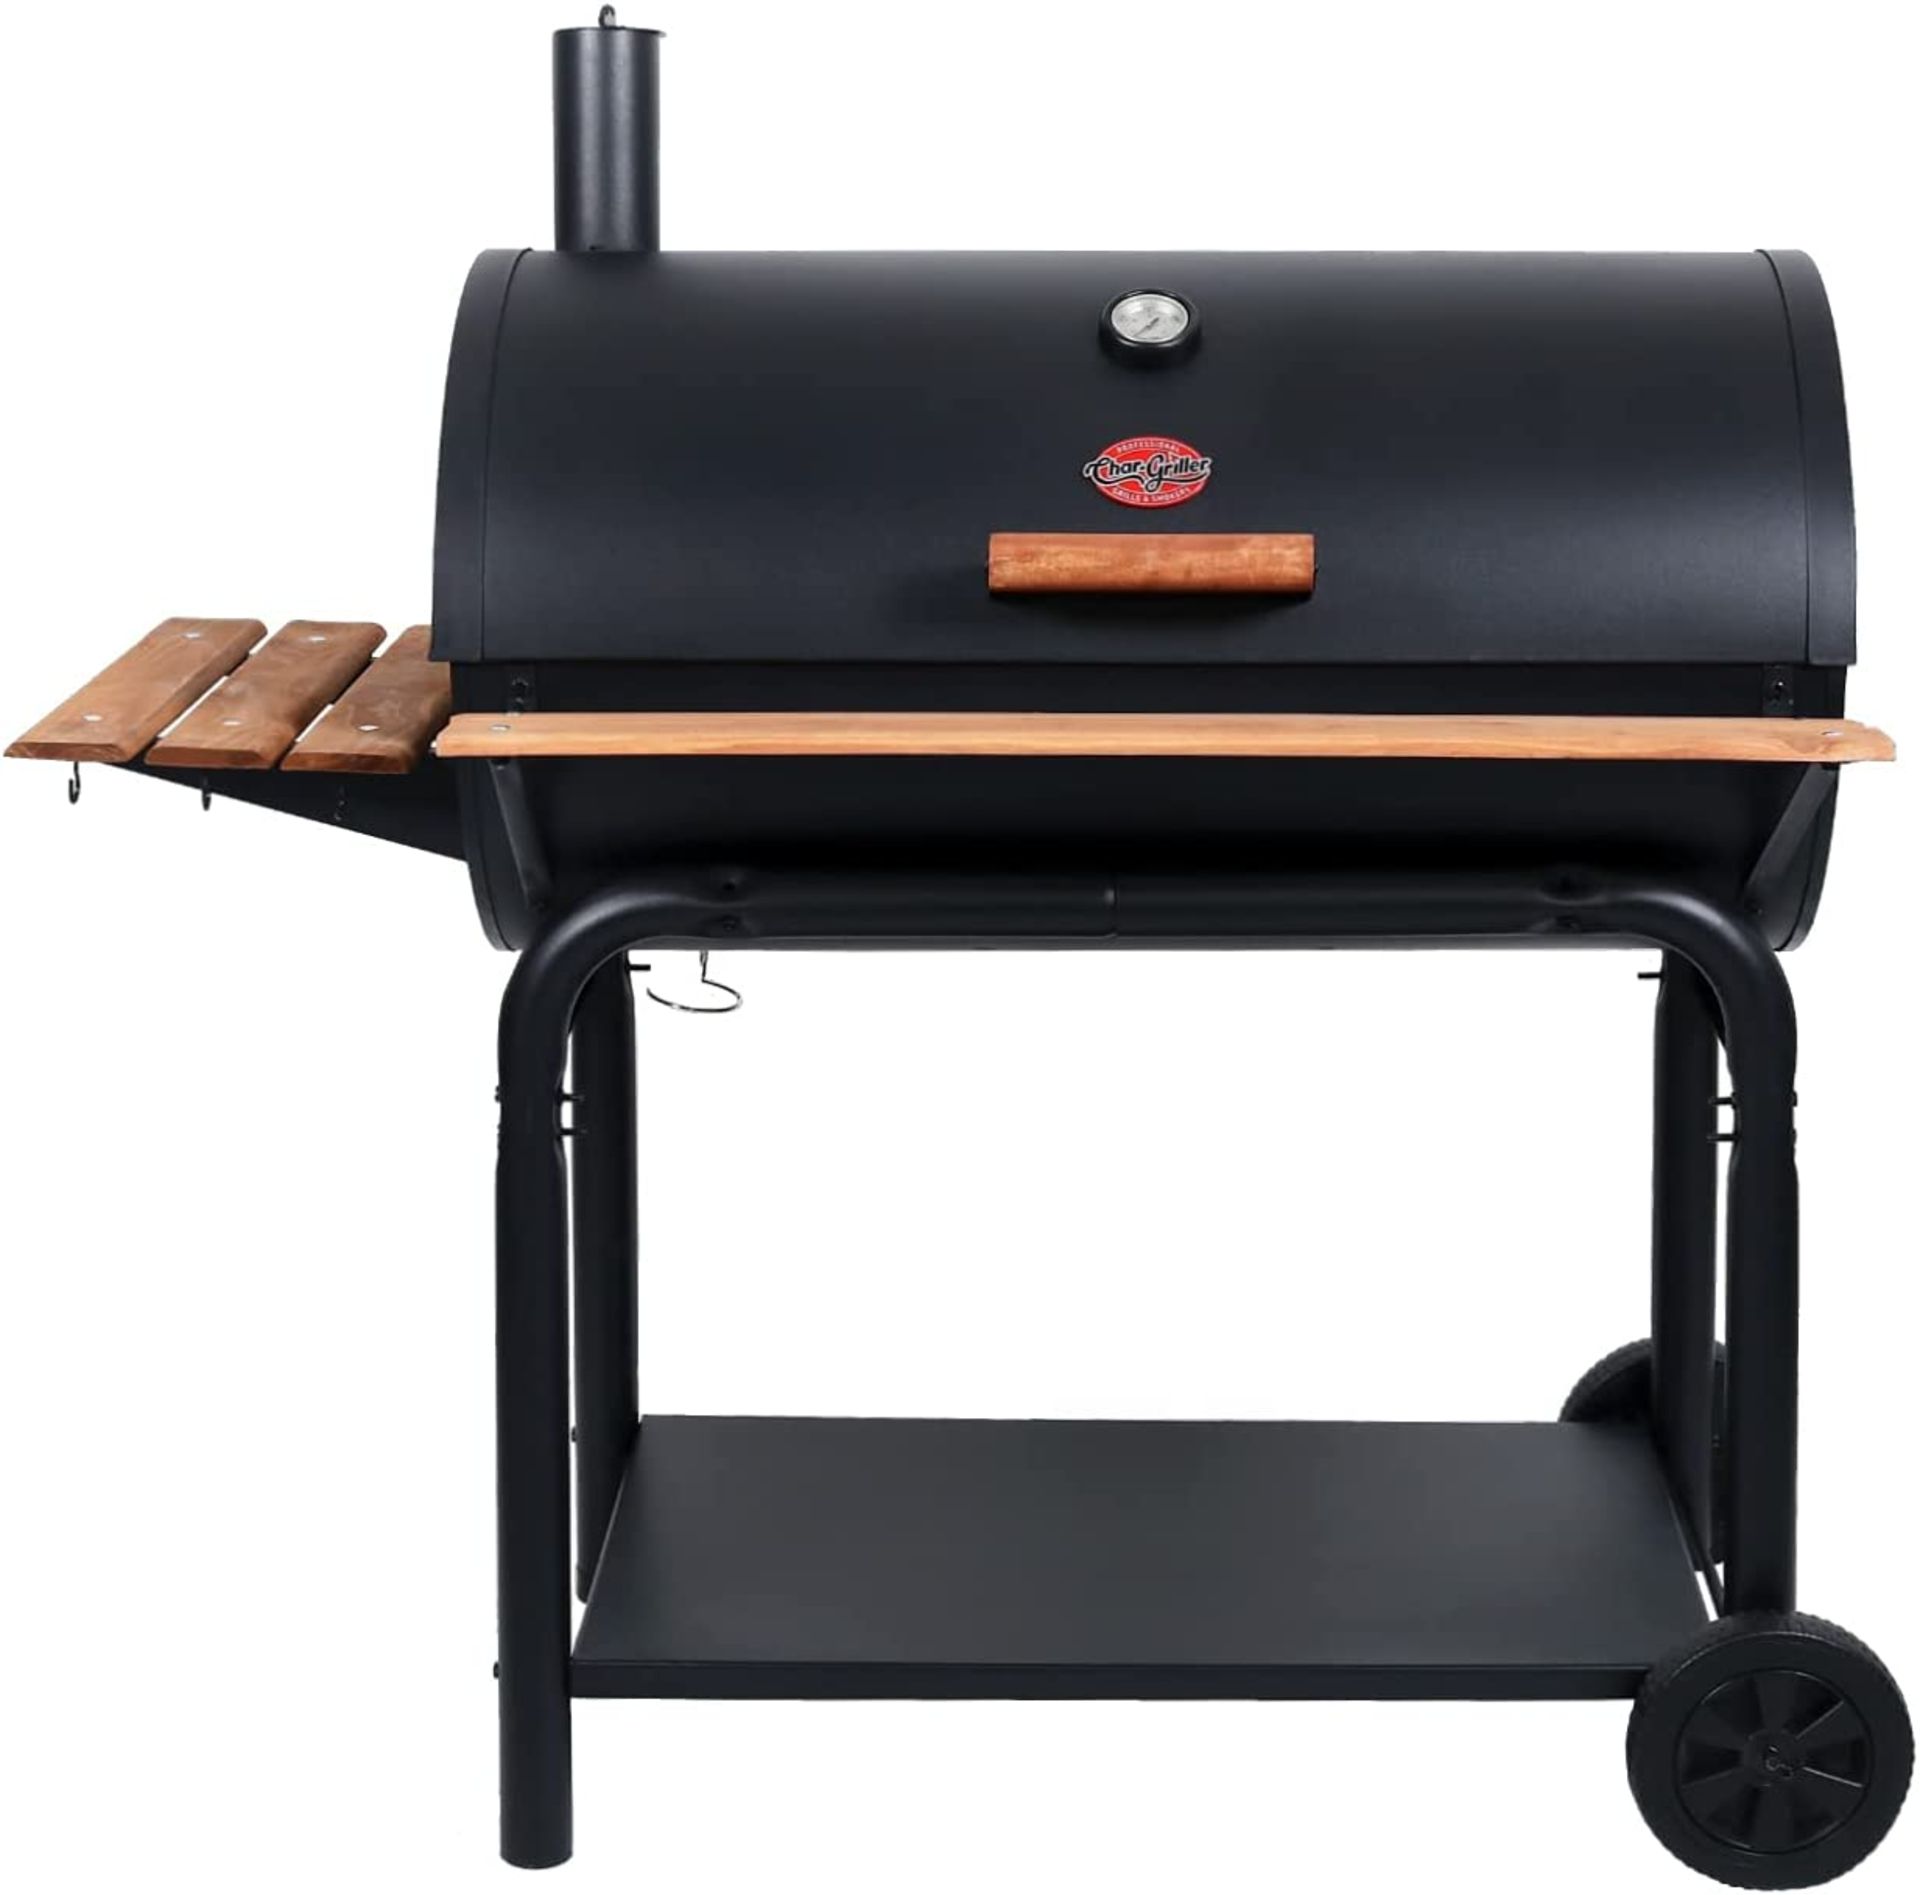 BRAND NEW CHAR GRILLER 2137 OUTLAW 1038 SQUARE INCH CHARCOAL GRILL/SMOKER - Image 11 of 12